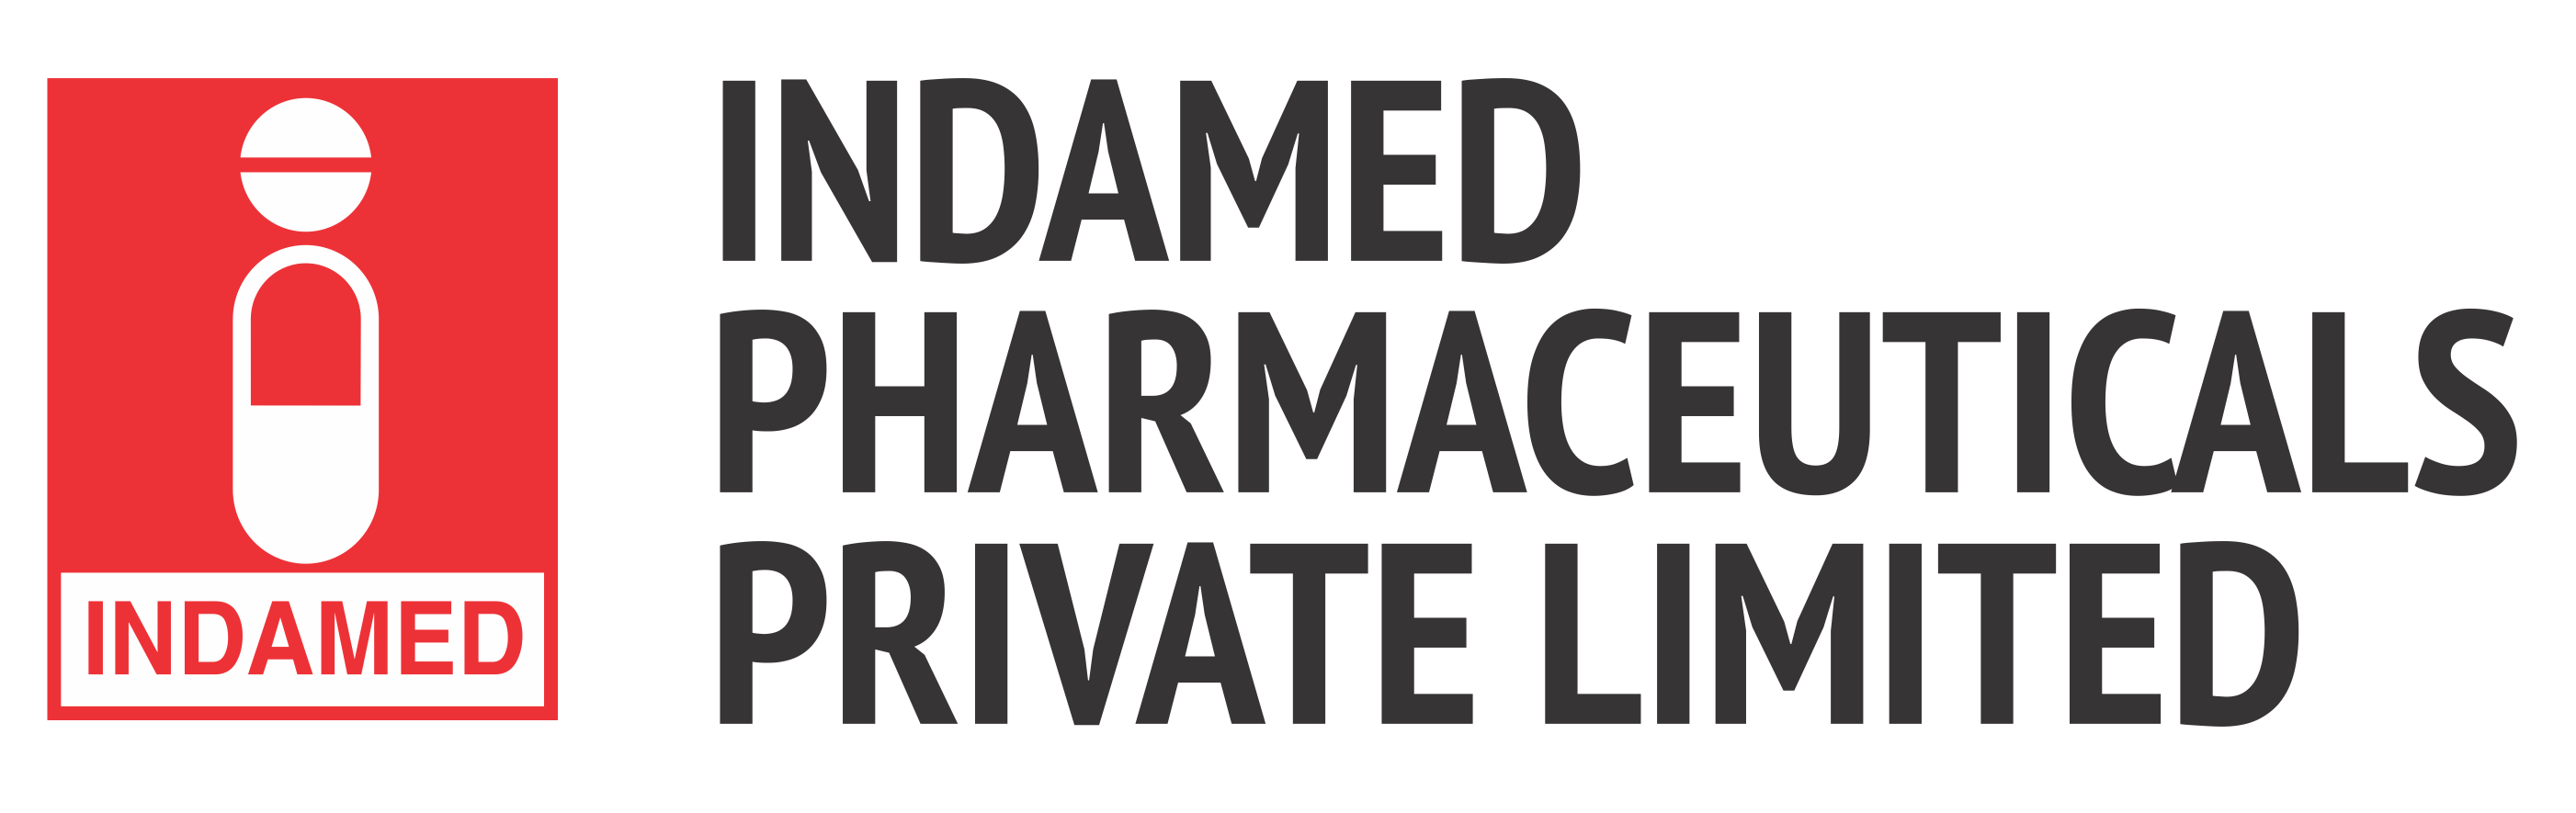 Our Products – Indamed Pharmaceuticals Pvt. Ltd.